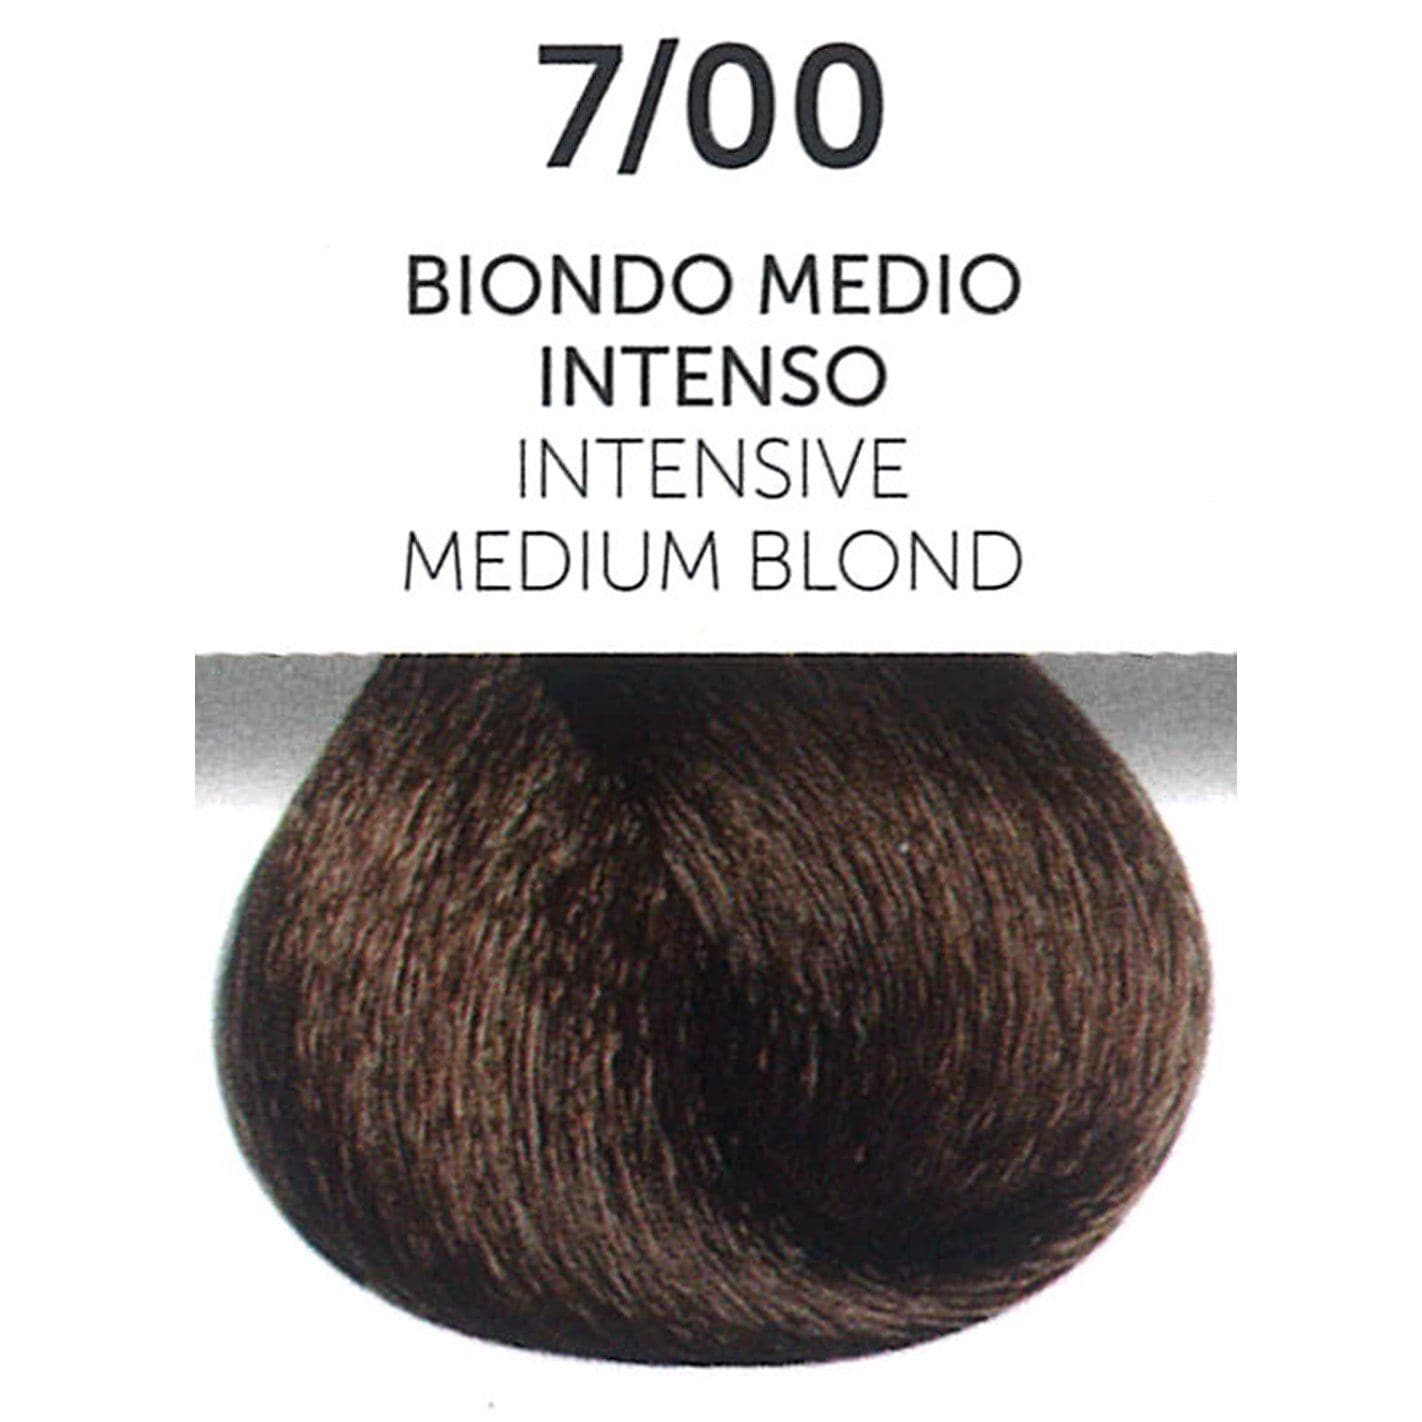 7/00 Intensive Medium Blond | Permanent Hair Color | Perlacolor HAIR COLOR OYSTER 